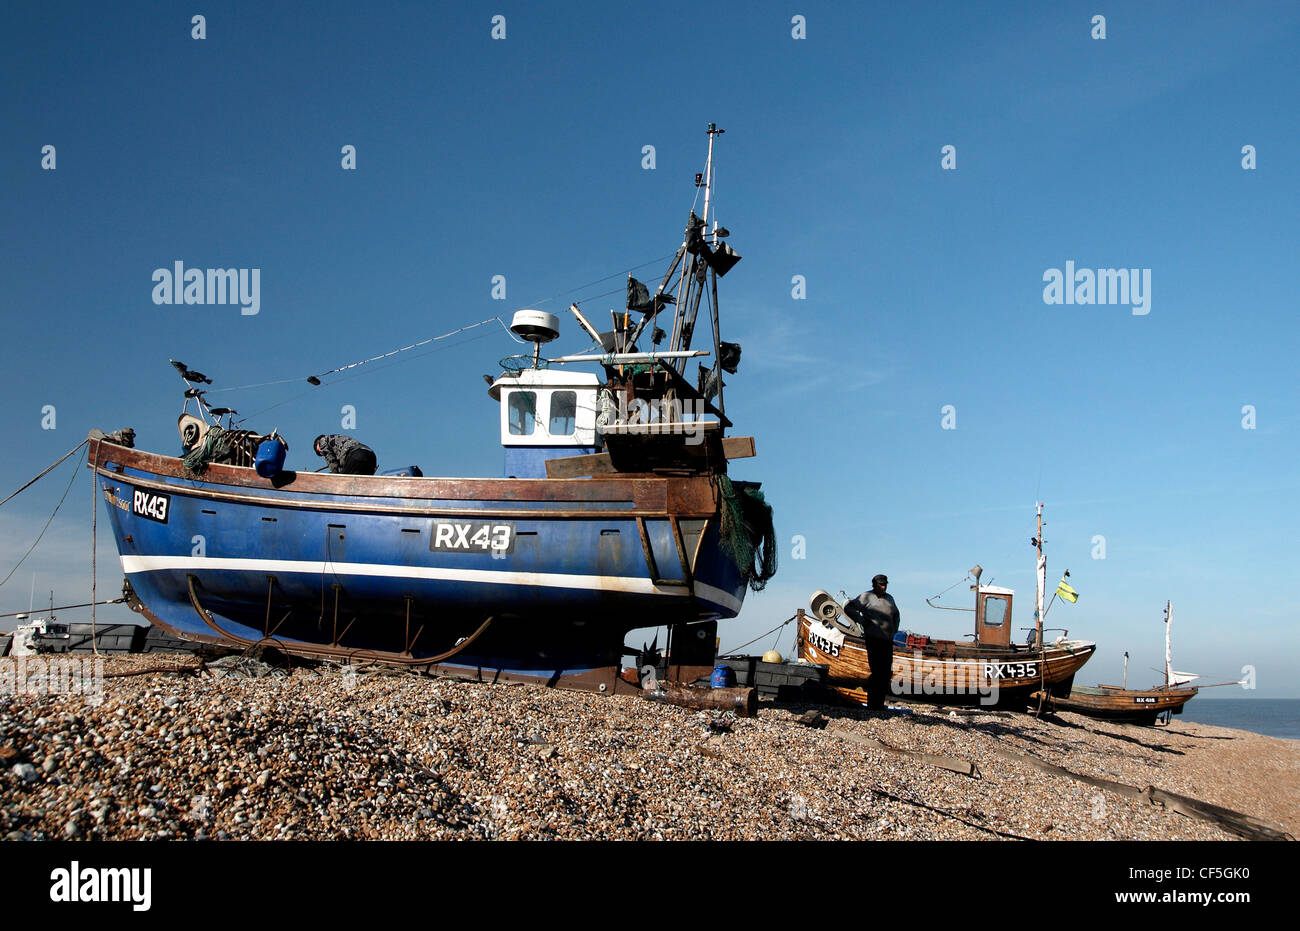 Boats on Dungeness beach. Dungeness consists of a complex of shingle and marsh situated along a 38-km stretch of coastline in Ke Stock Photo